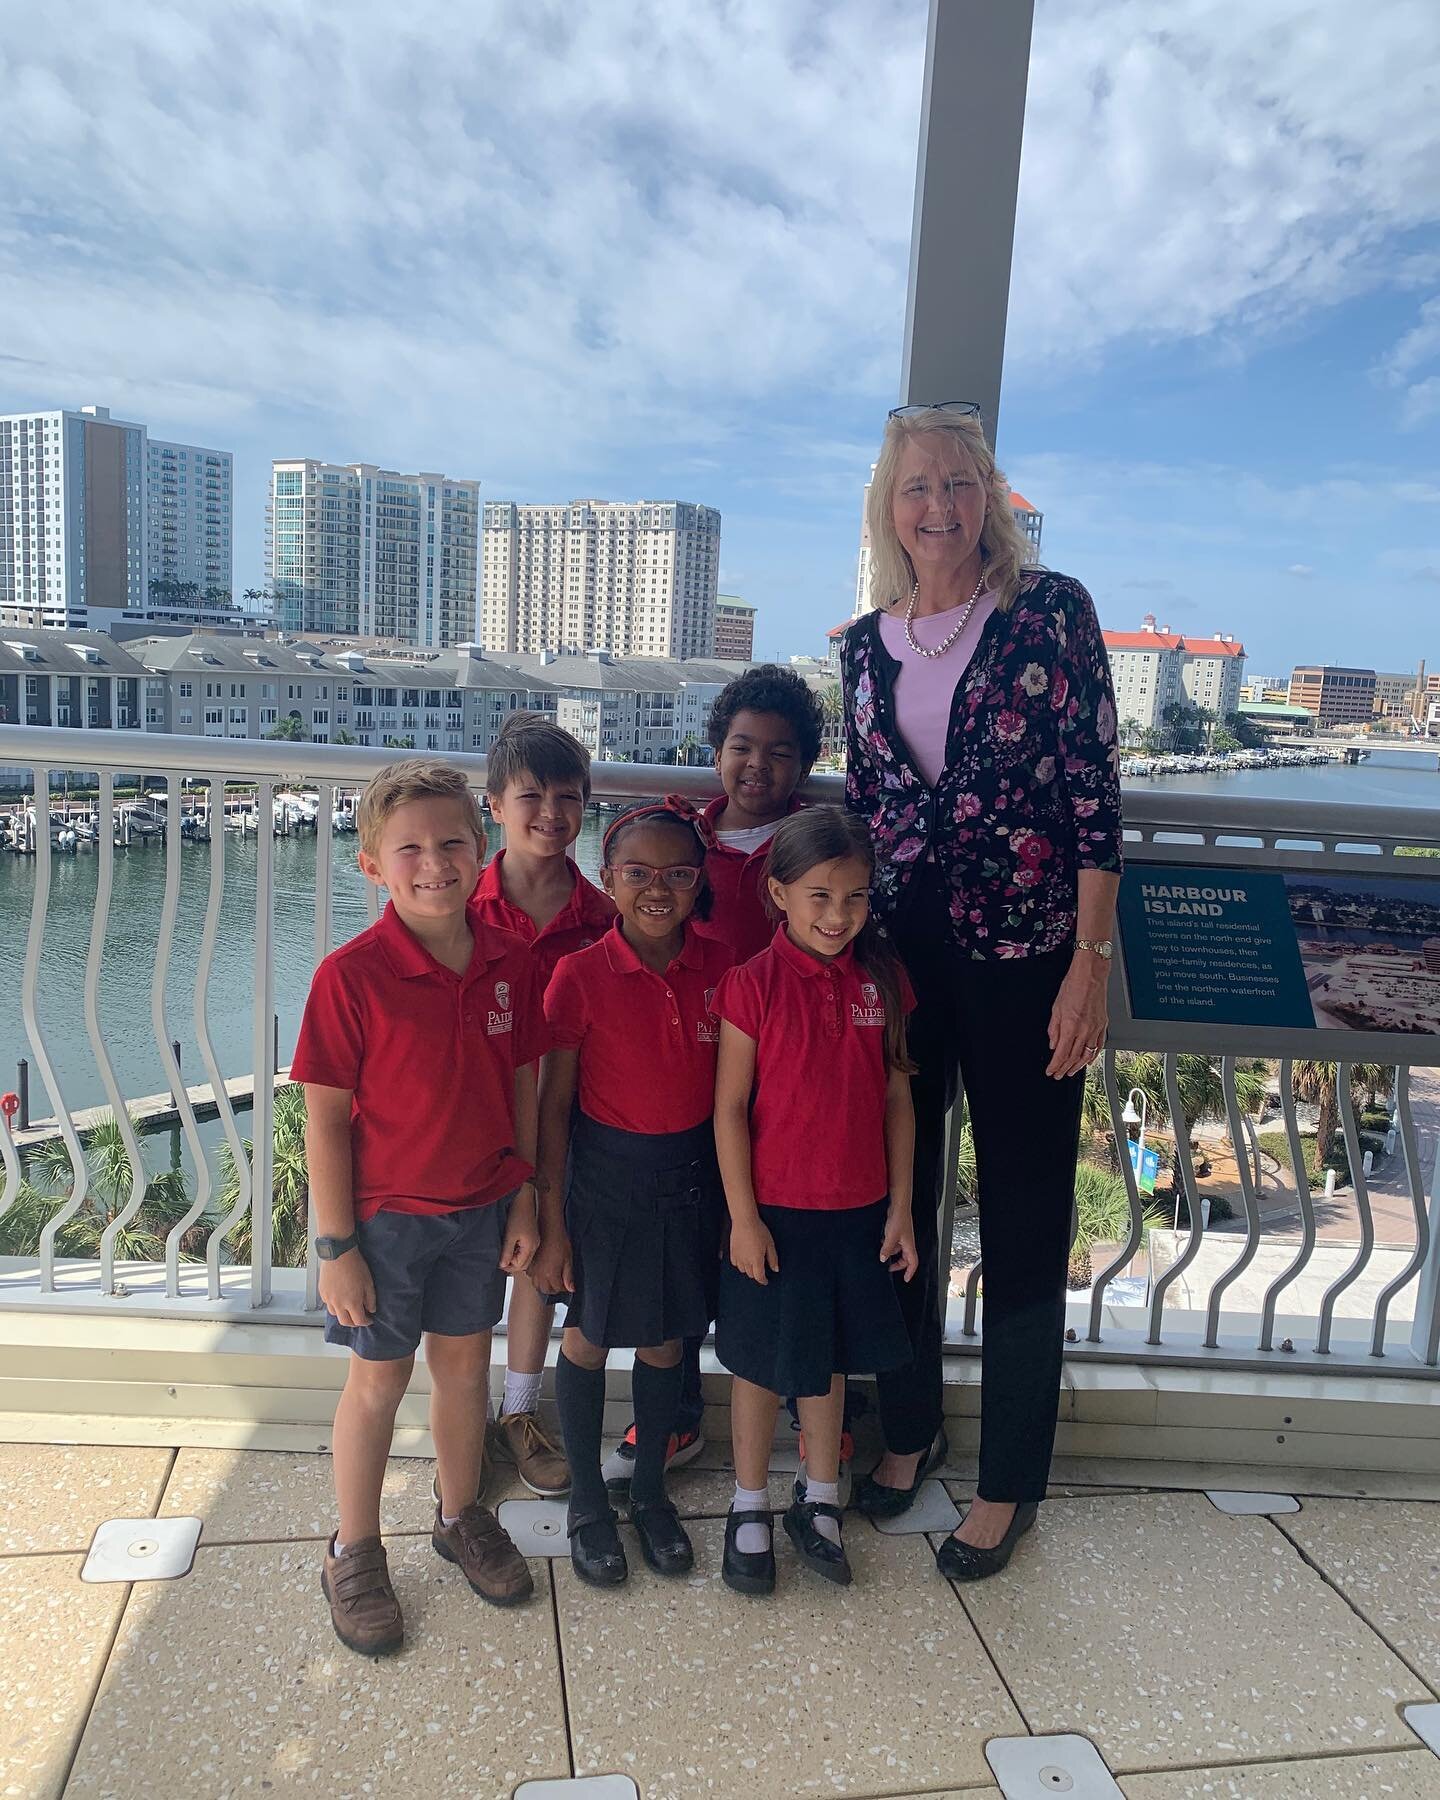 First graders went to the Tampa Bay History Center and had a wonderful learning experience.